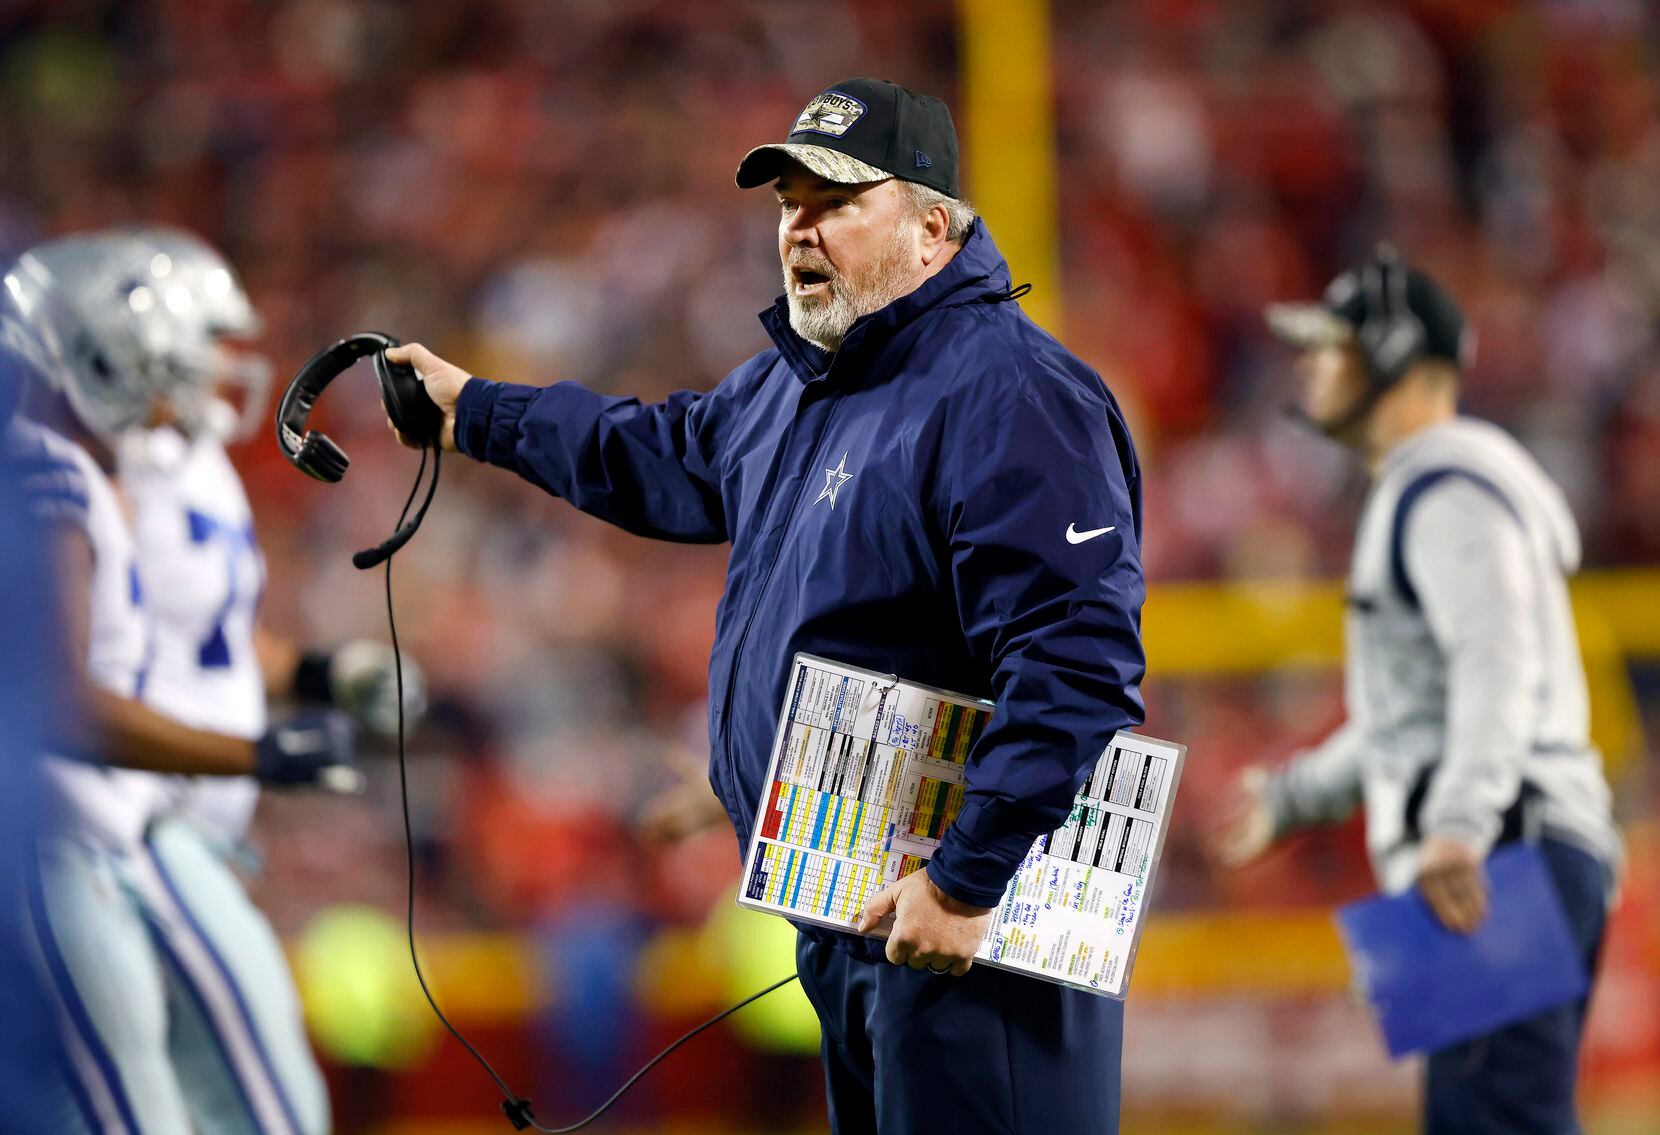 Dallas Cowboys head coach Mike McCarthy yells at an official after they kicked a third quarter field goal against the Kansas City Chiefs at Arrowhead Stadium in Kansas City, Missouri, November 21, 2021. The Cowboys lost, 19-9. (Tom Fox/The Dallas Morning News)